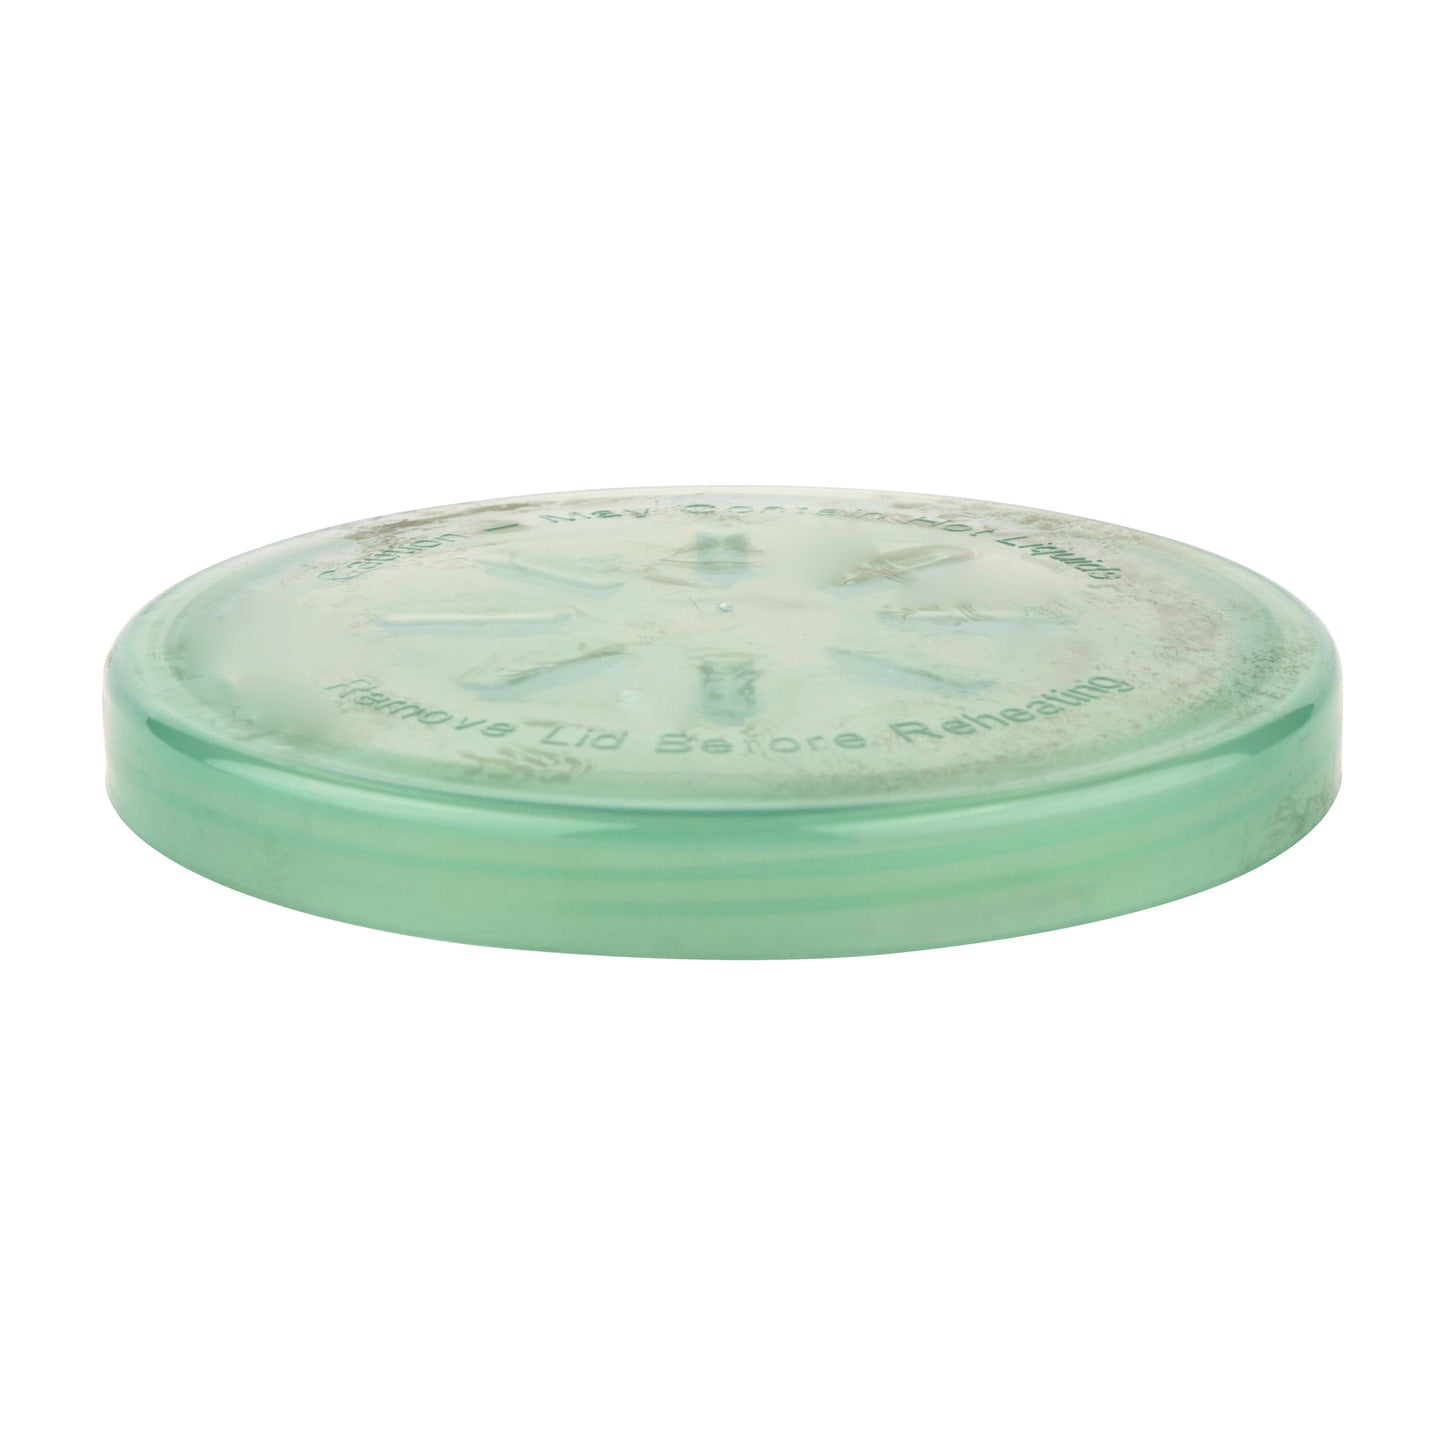 Replacement Lid for EC-07-1 and EC-13-1